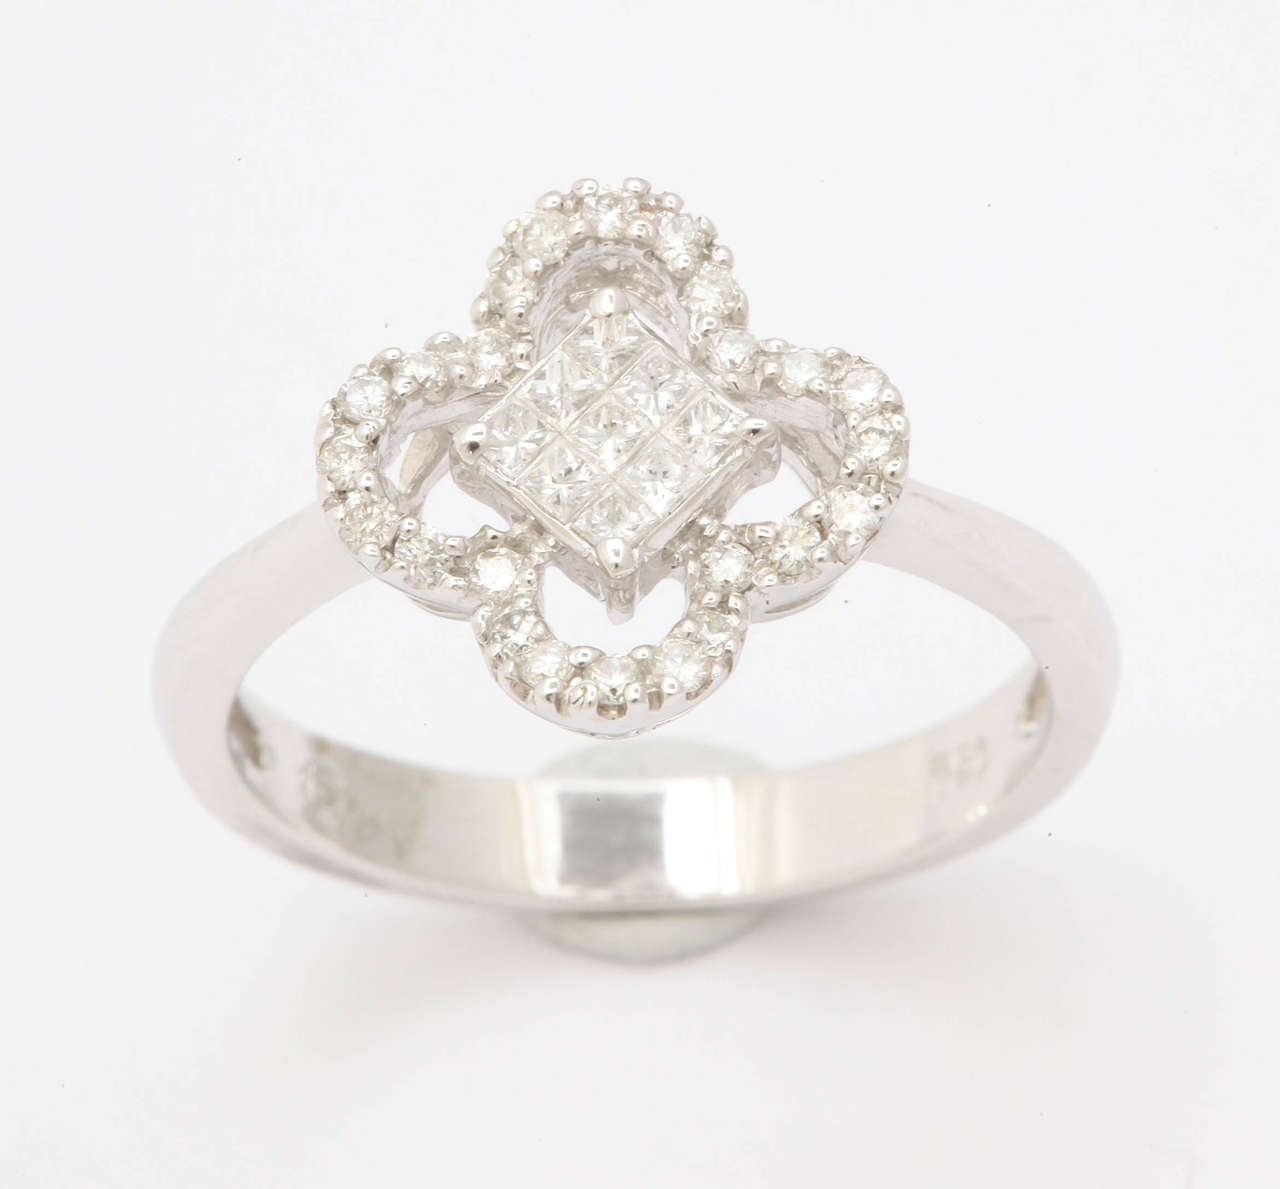 The center of this 18 kt white gold ring holds 9 square radiant cut invisibly set diamonds. The center is surrounded by 4 arches of round white diamonds. Total diamond weight is .38 ct. A simply lovely ring for any occasion.